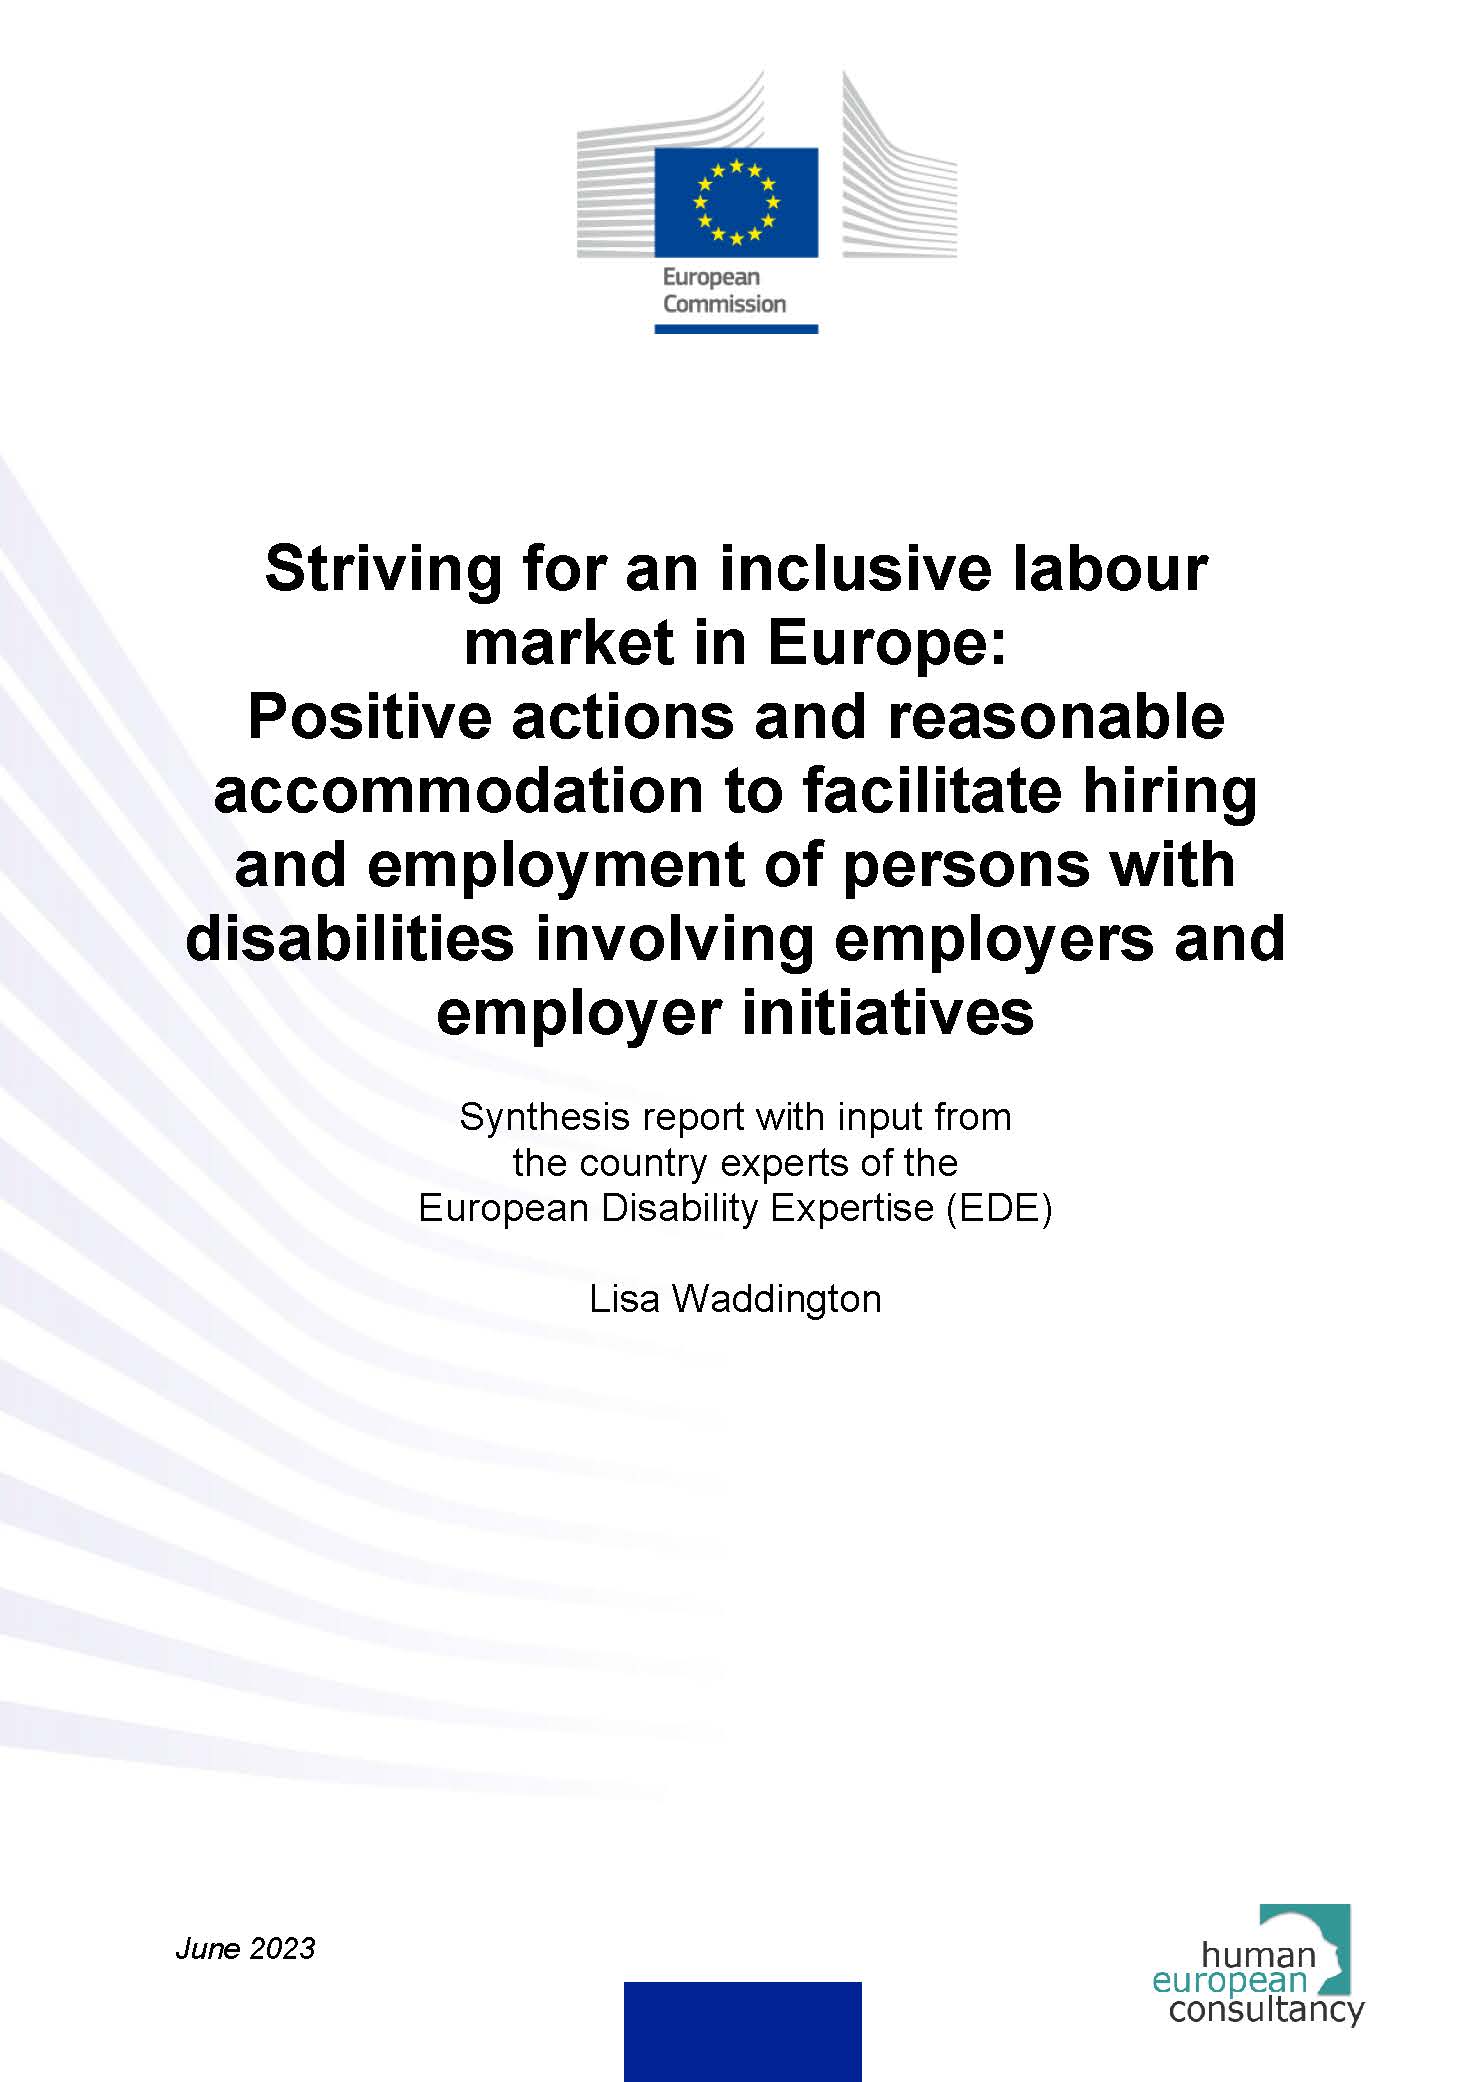 Striving for an inclusive labour market in Europe: Positive actions and reasonable accommodation to facilitate hiring and employment of persons with disabilities involving employers and employer initiatives